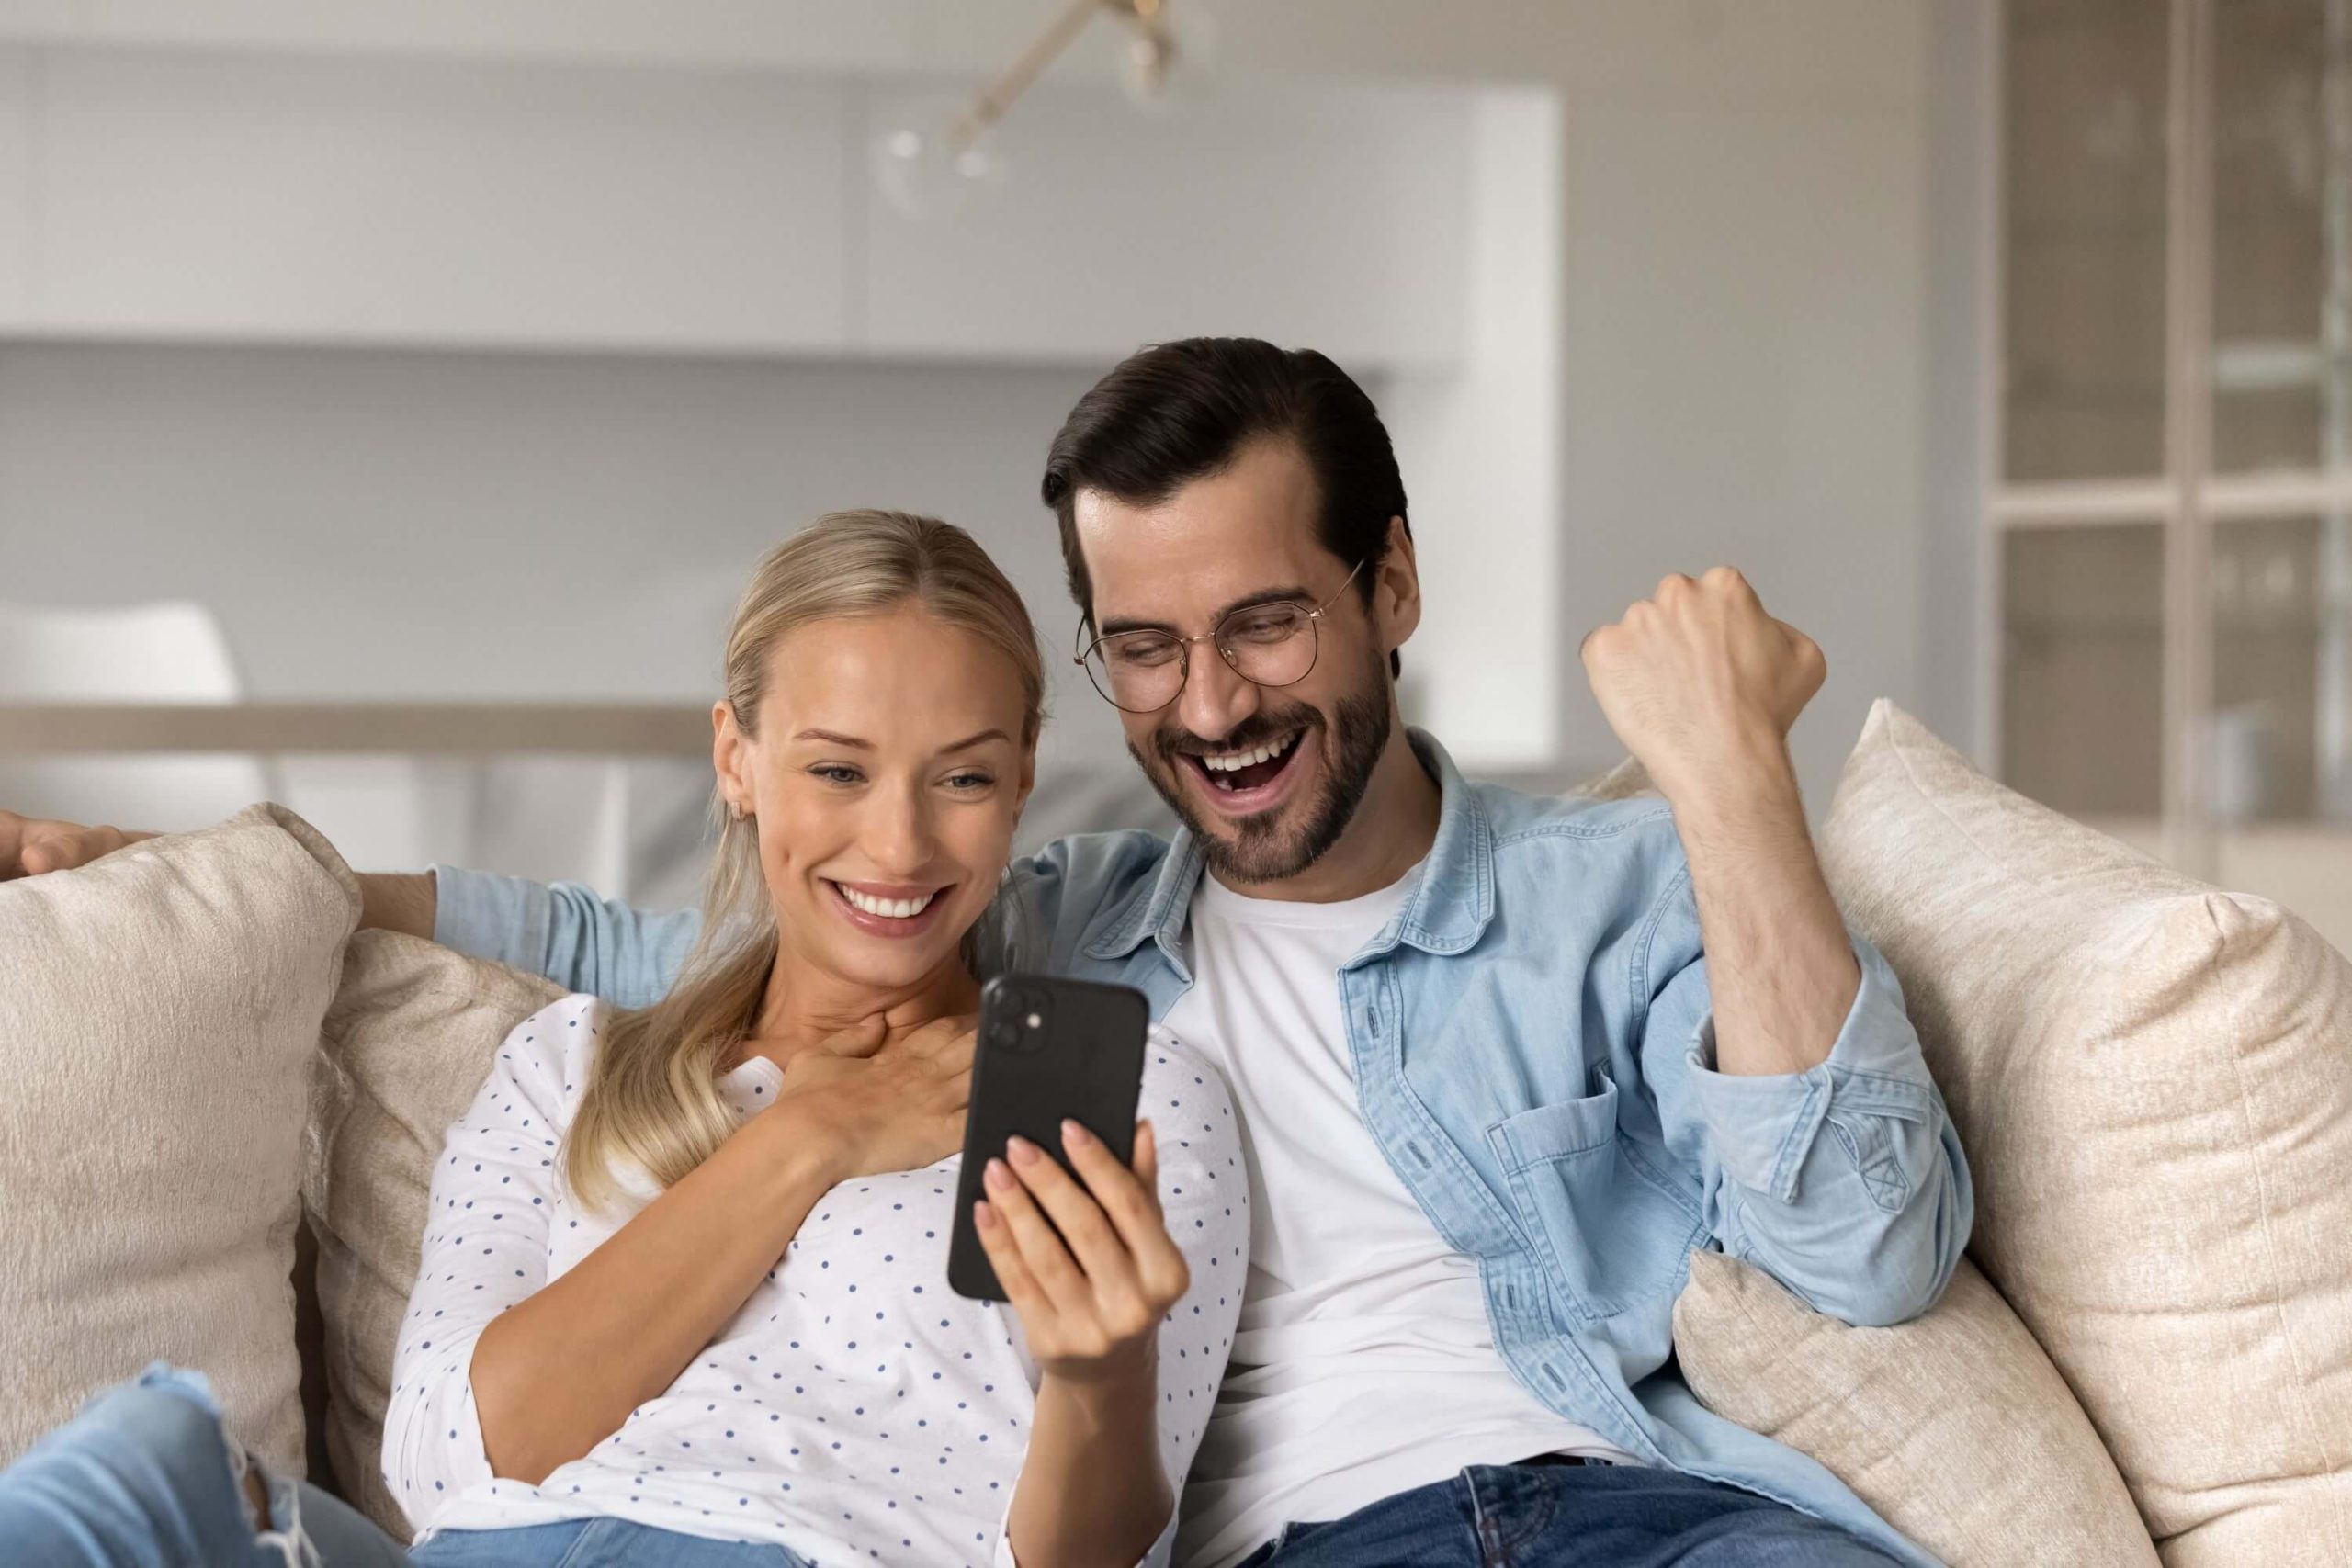 Happy couple getting news of no deposit home loan approval